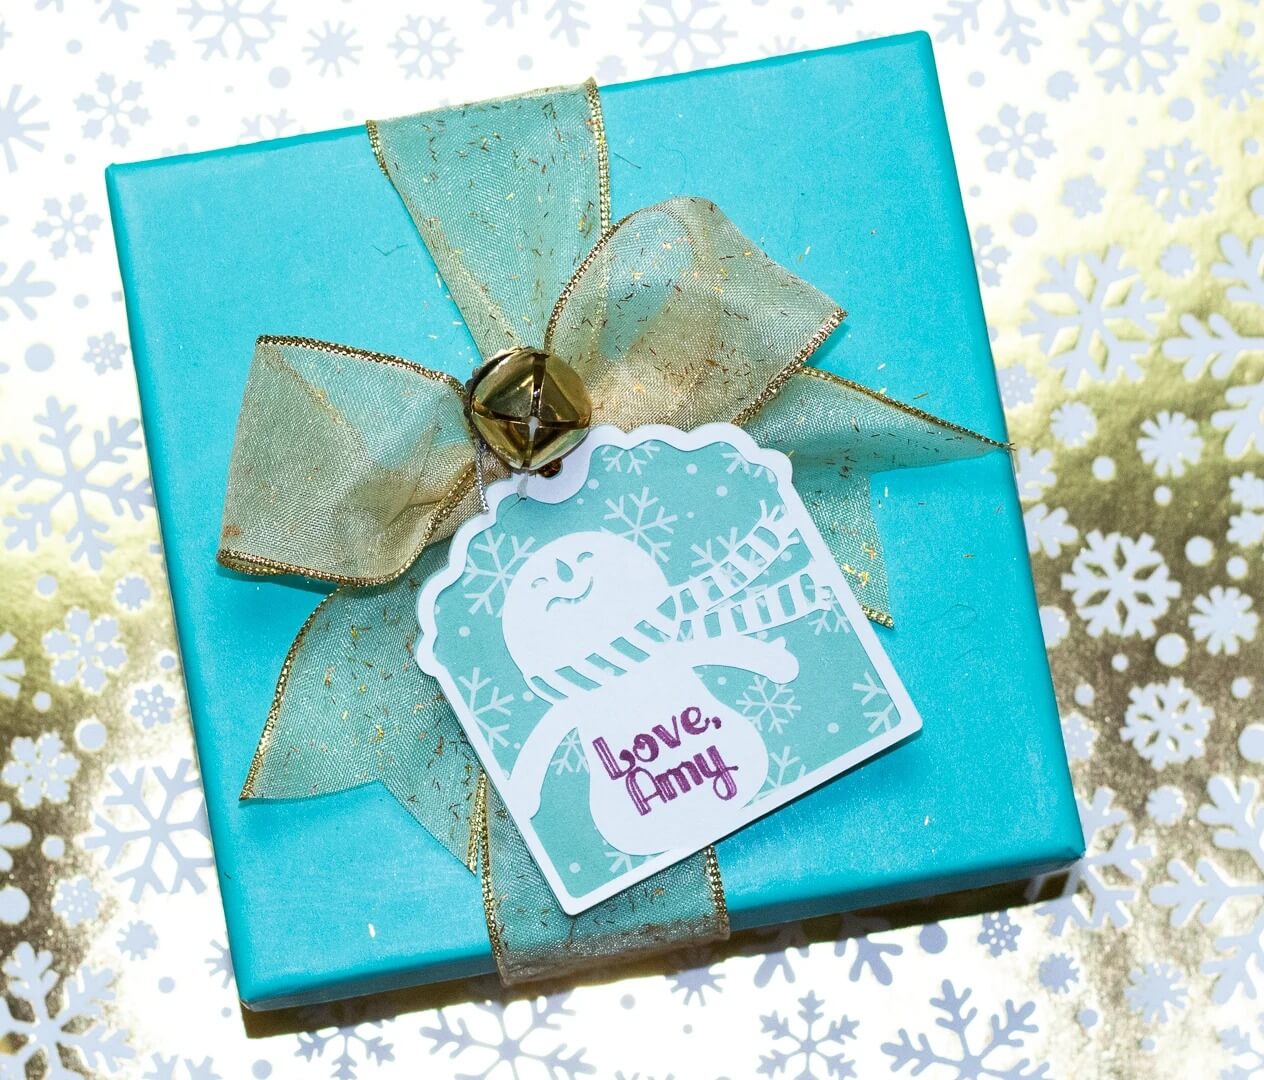 Handmade Gift Tag Craft Idea Using Cardstock & Cricut Machine For Beginners Free Cricut Projects With Cardstock